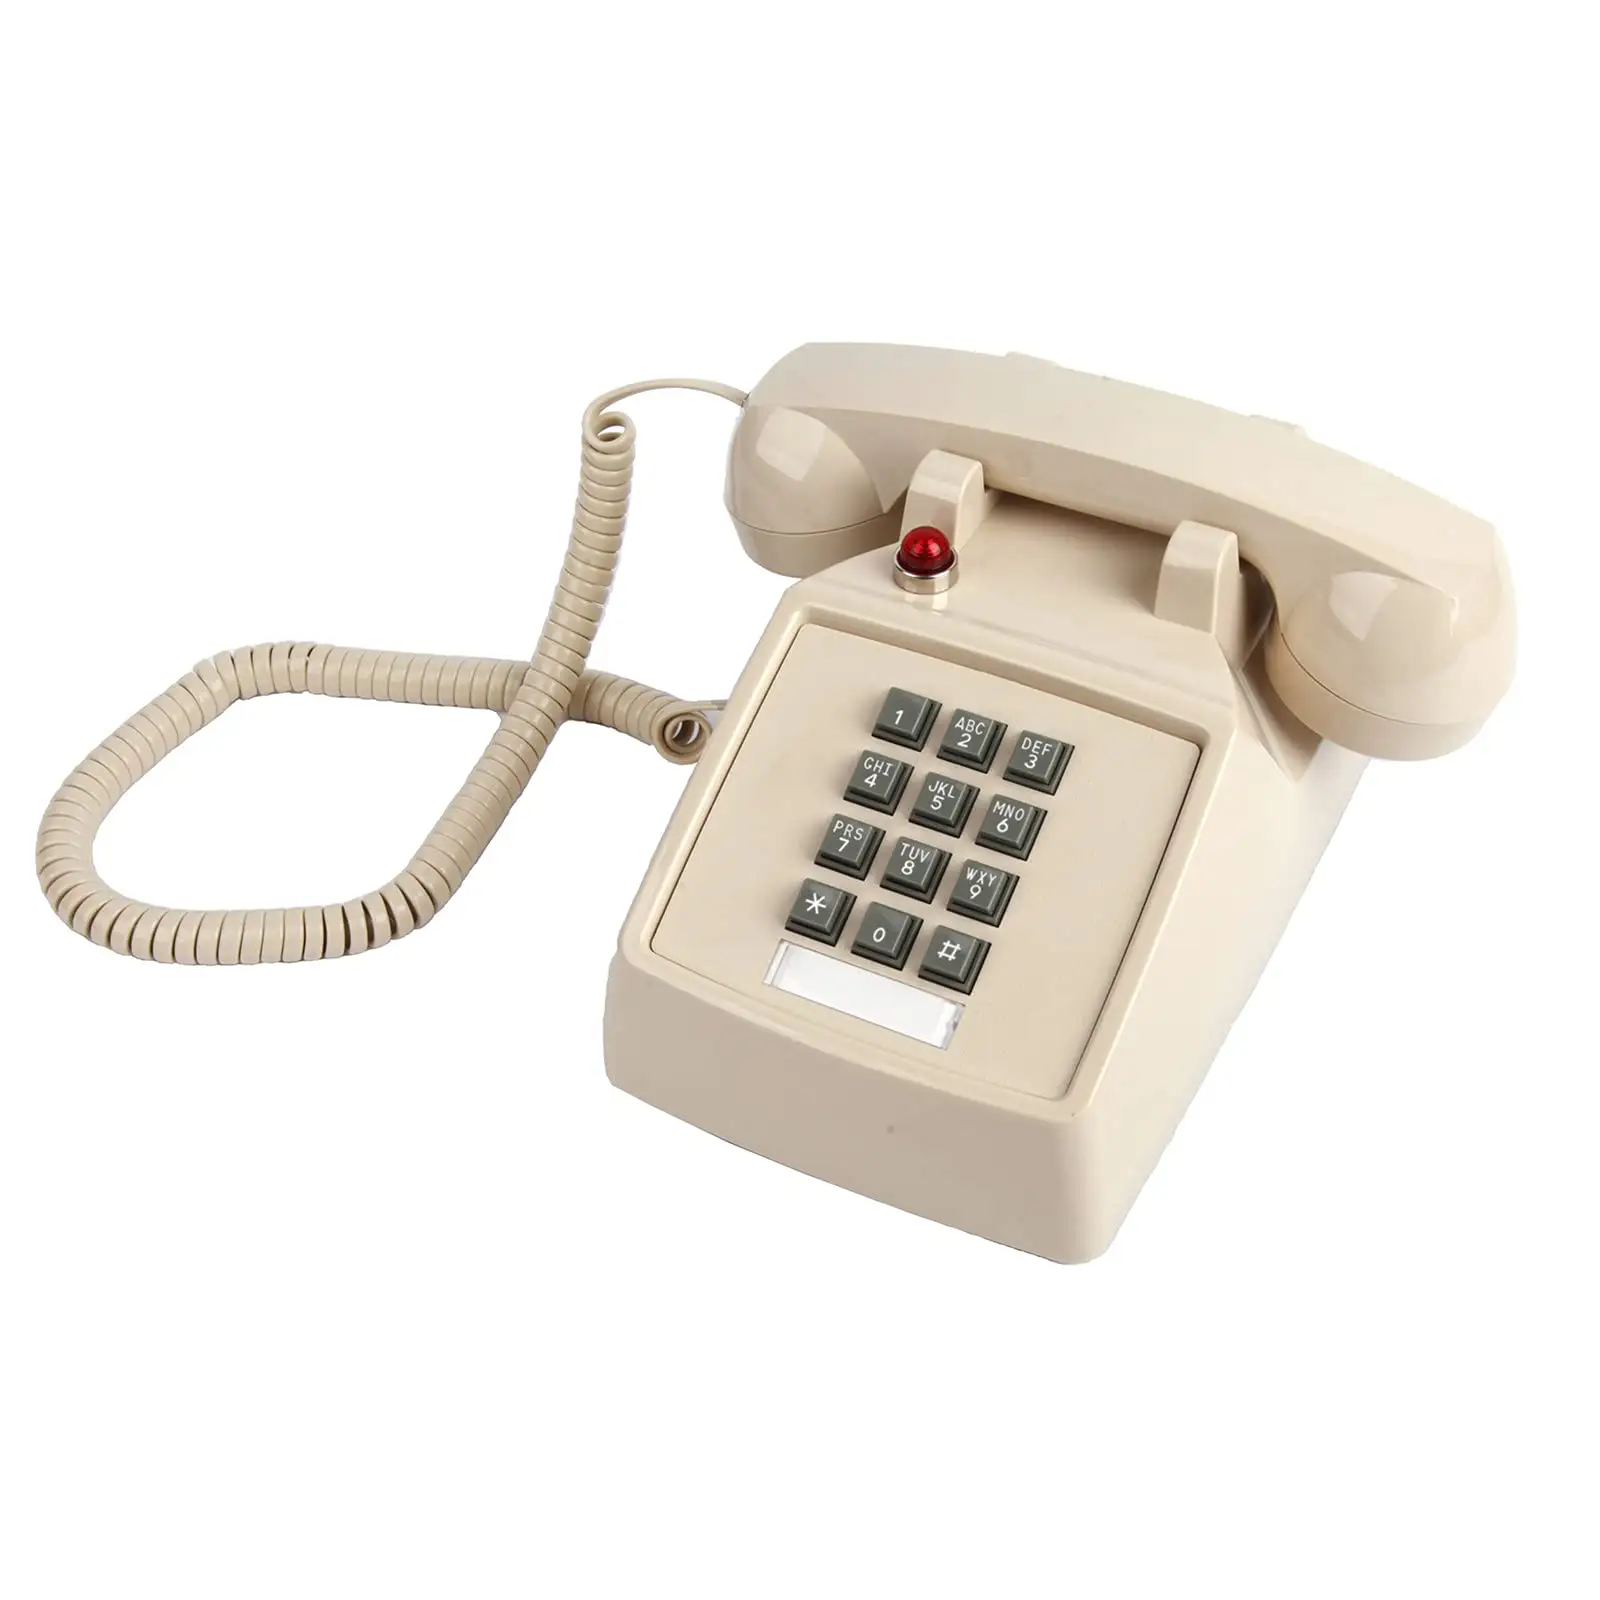 Single Line Corded Desk Phone with Red Indicator, Retro Phone with Extra Loud Ringer, Corded Landline Phone for Home and School,